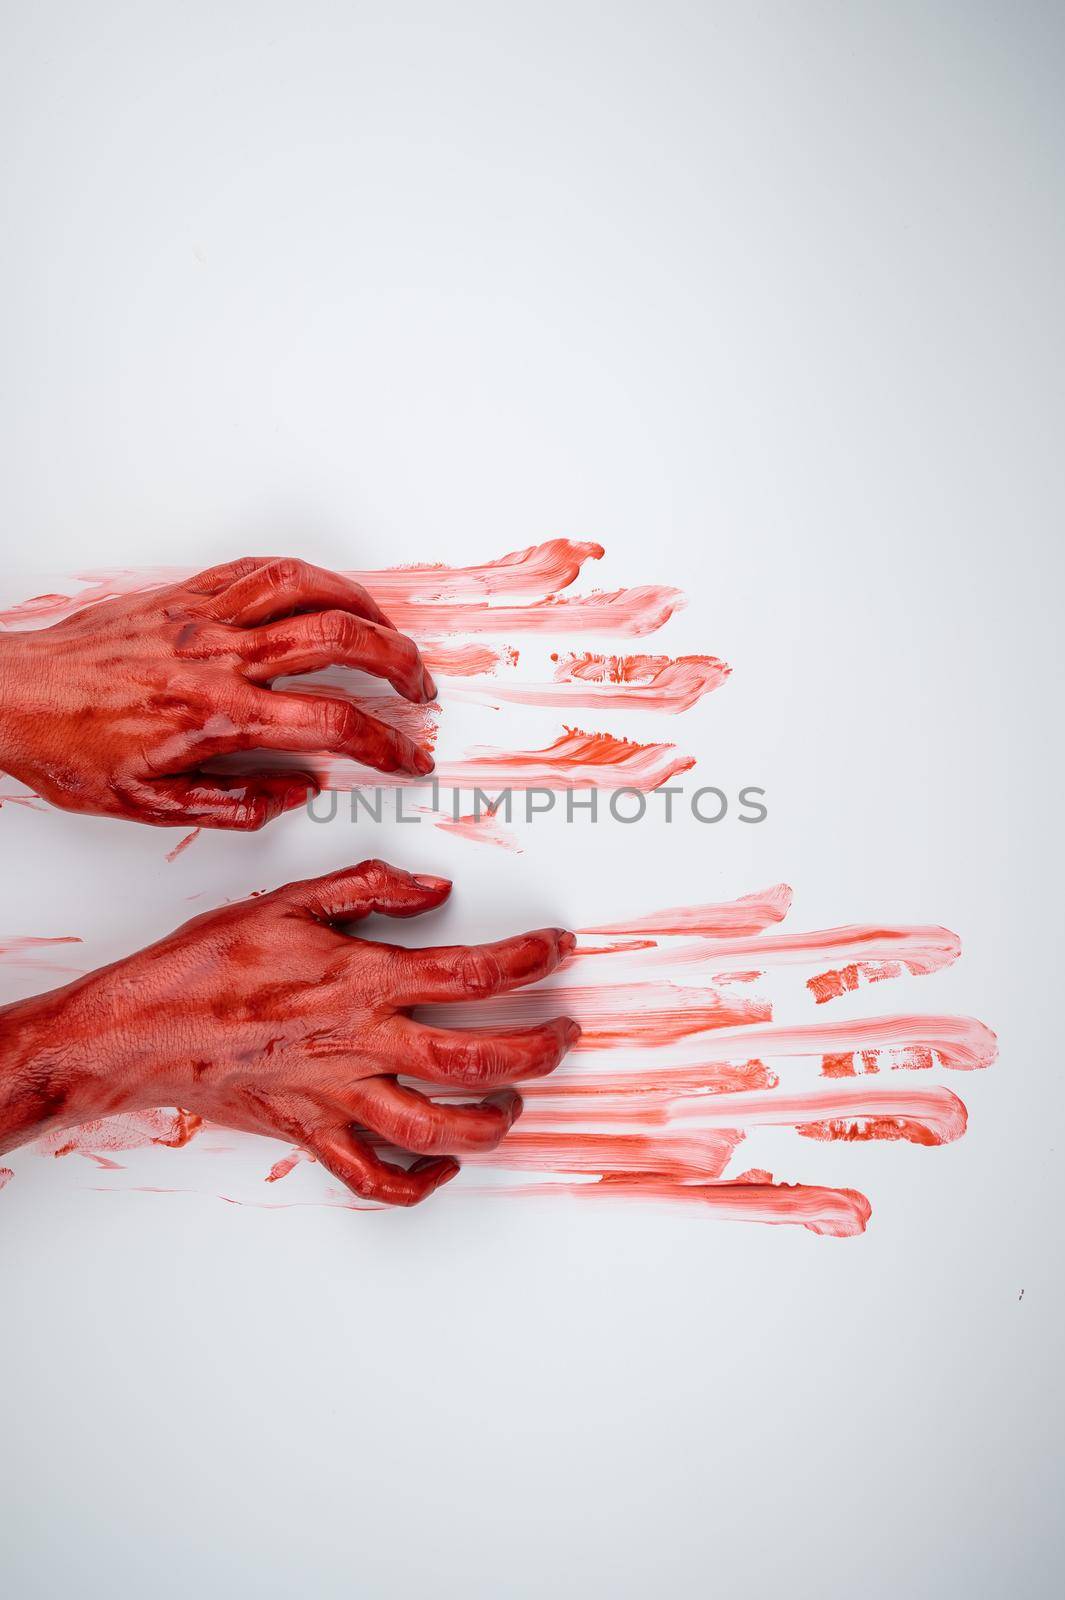 Female hands in blood on a white background. by mrwed54